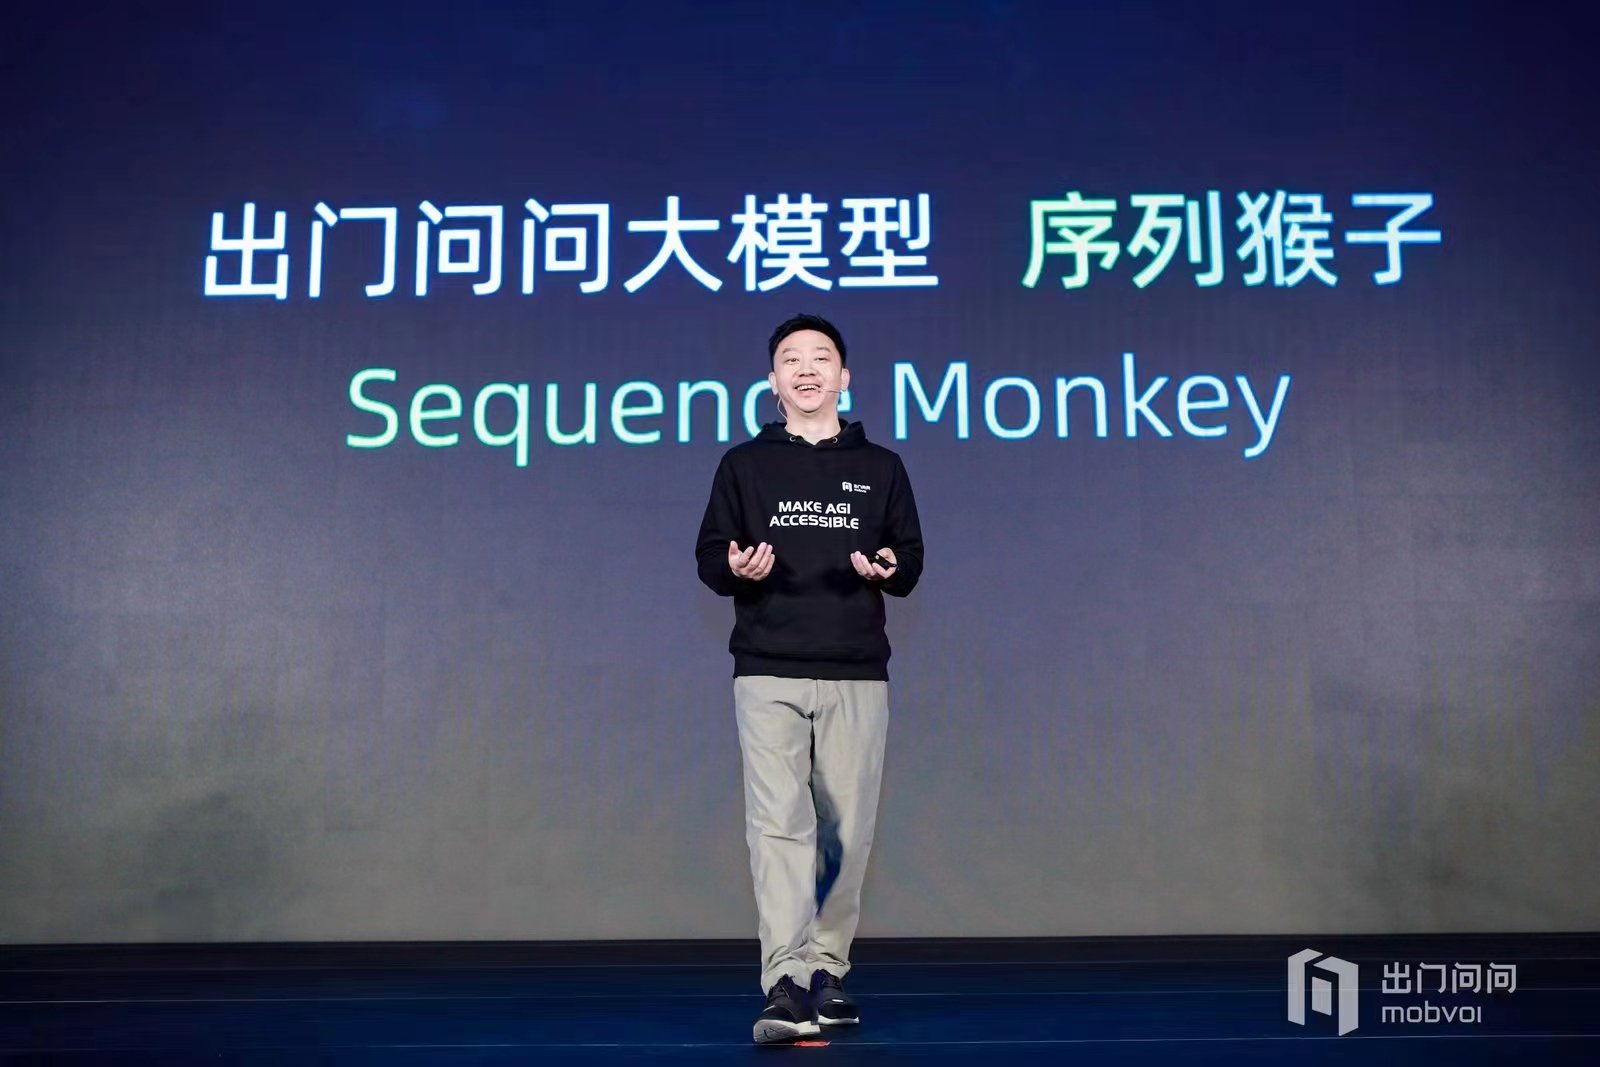 Mobvoi last month launched its large language model called Xuliehouzi, which roughly translates as “Sequencing Monkey”. Photo: Handout